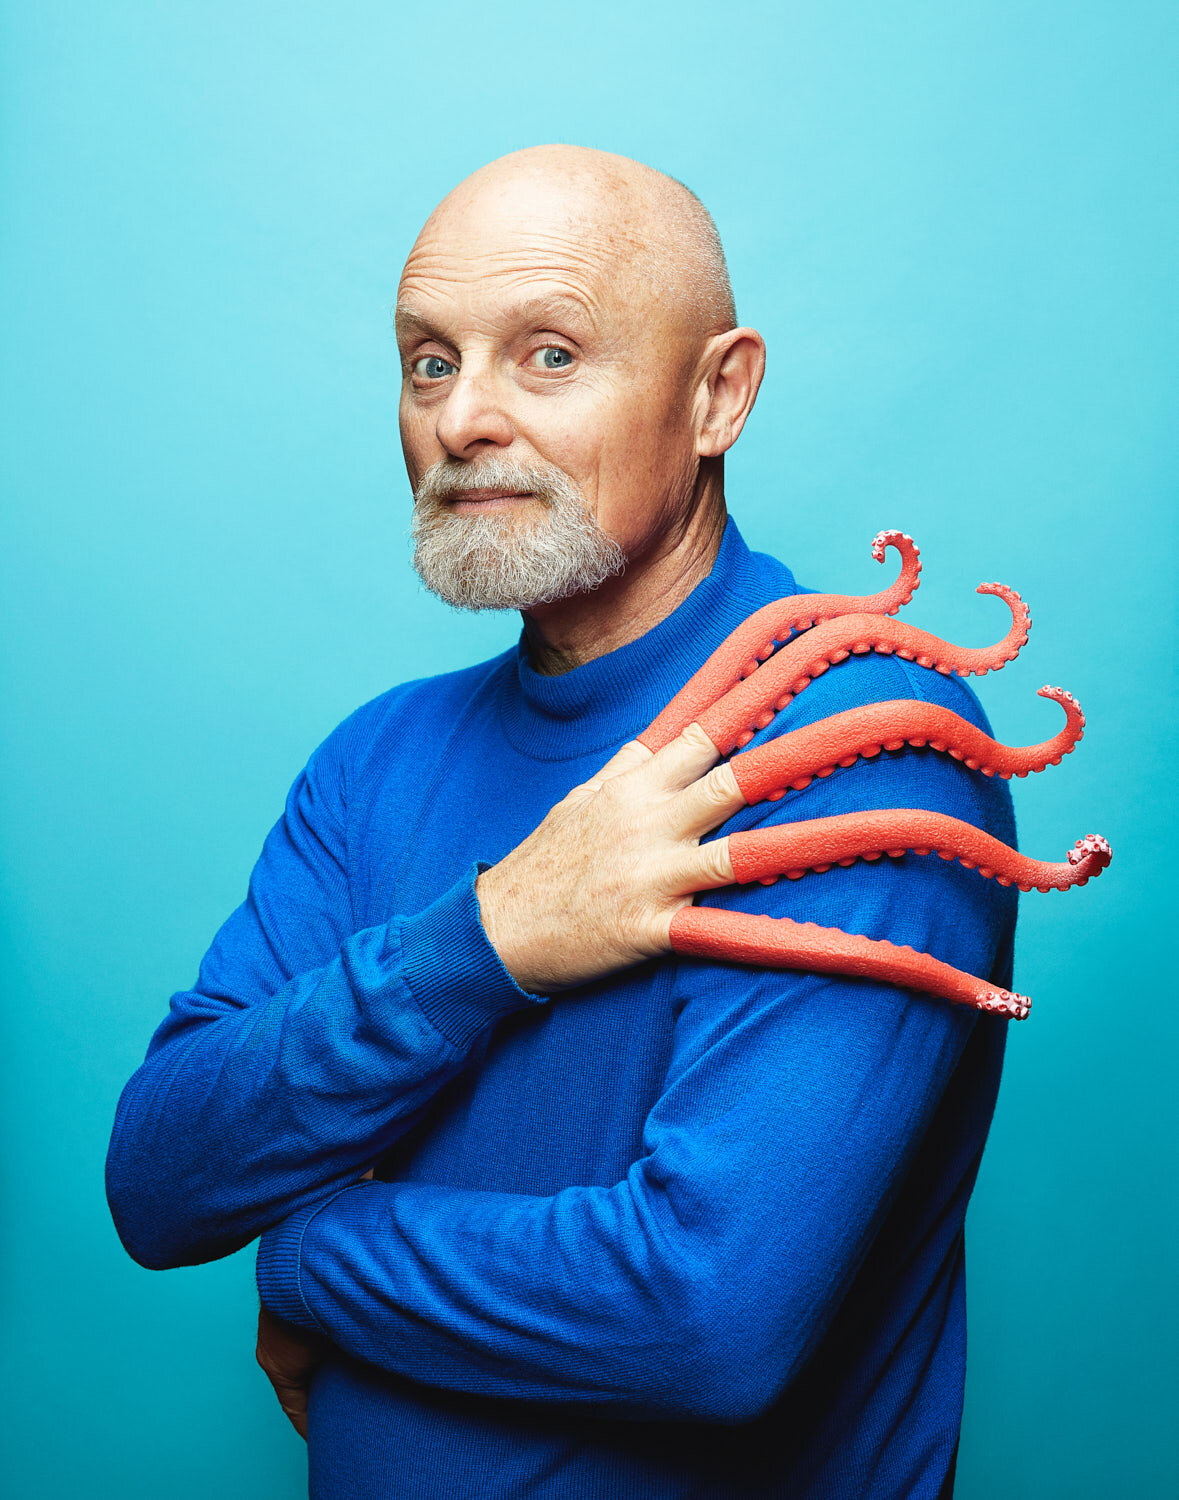 silly portrait of composer William Neil wearing octopus tentacles on his fingers by portrait photographer Hanna Agar